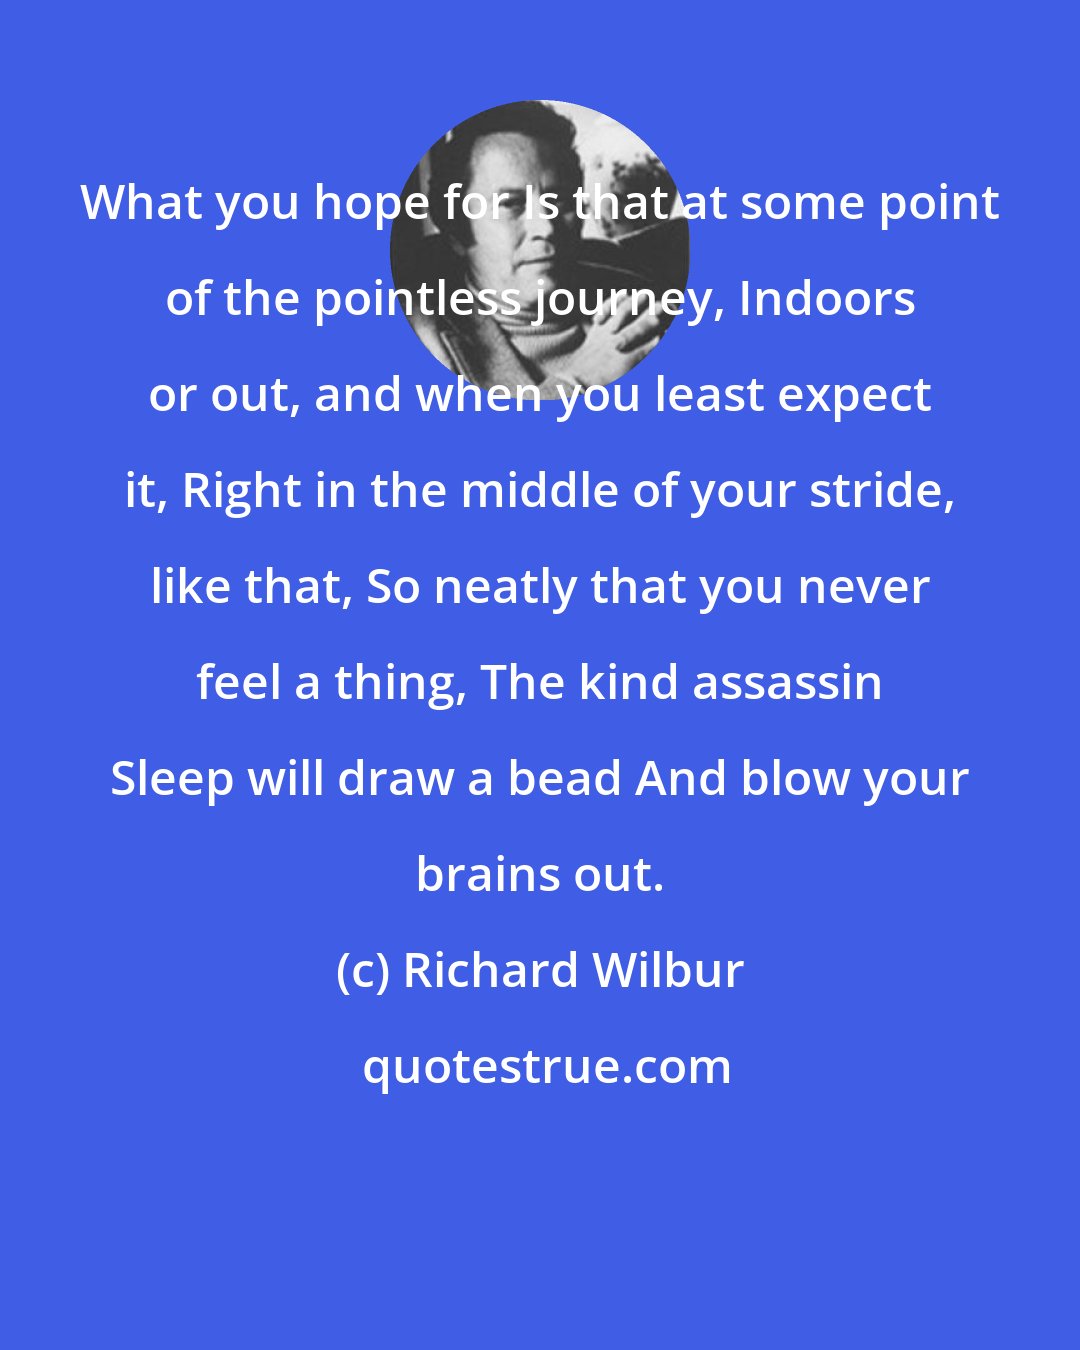 Richard Wilbur: What you hope for Is that at some point of the pointless journey, Indoors or out, and when you least expect it, Right in the middle of your stride, like that, So neatly that you never feel a thing, The kind assassin Sleep will draw a bead And blow your brains out.